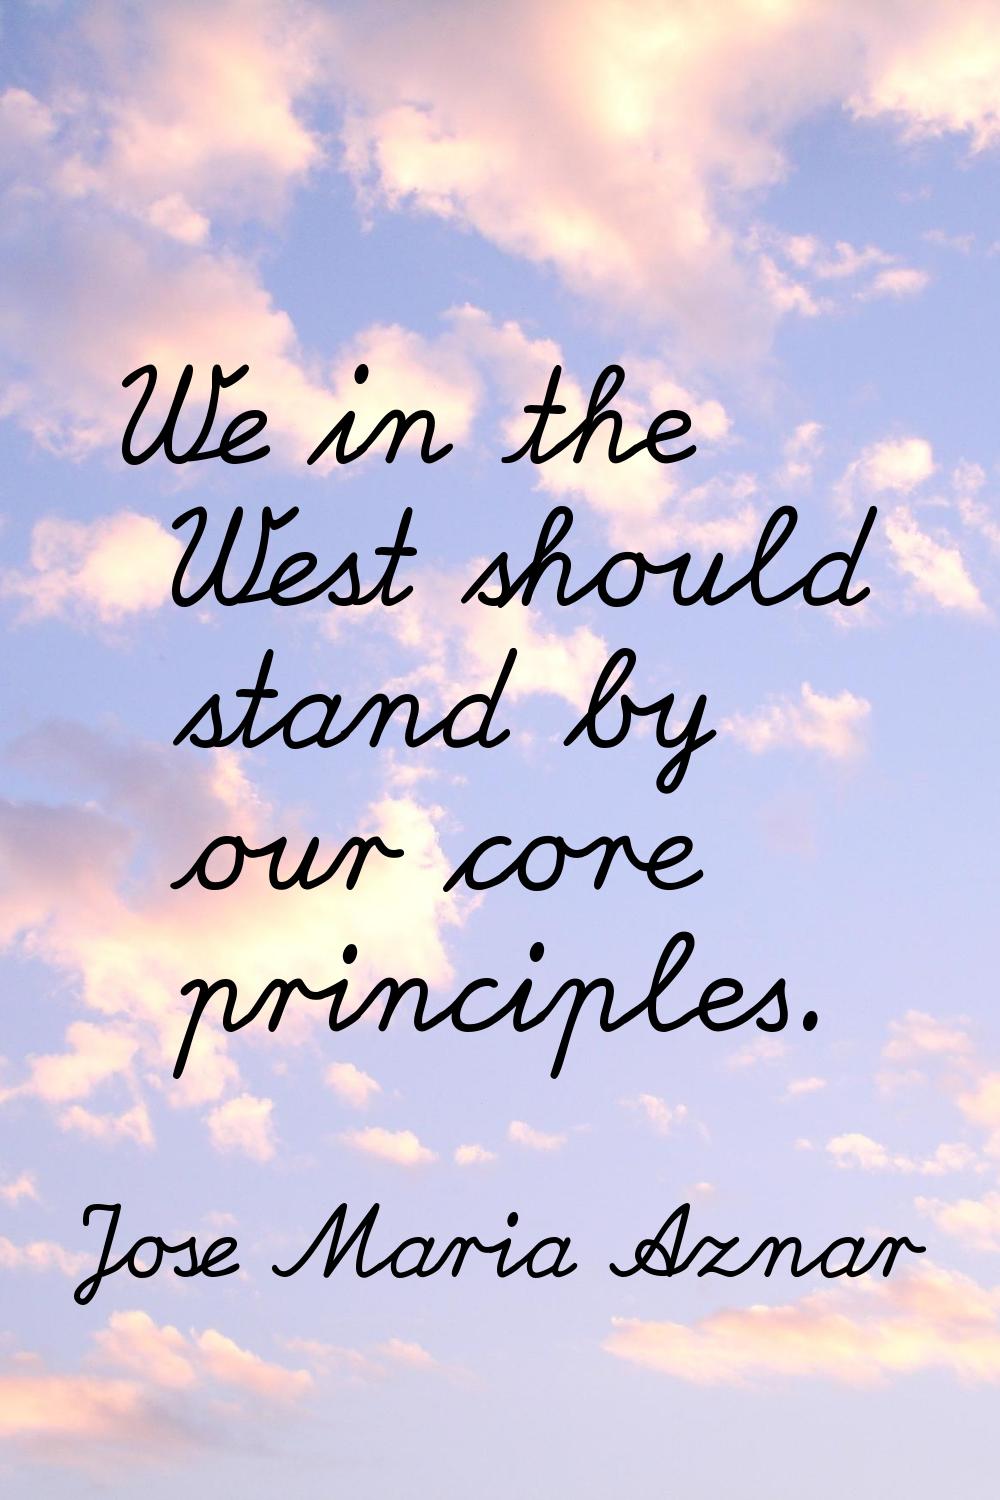 We in the West should stand by our core principles.